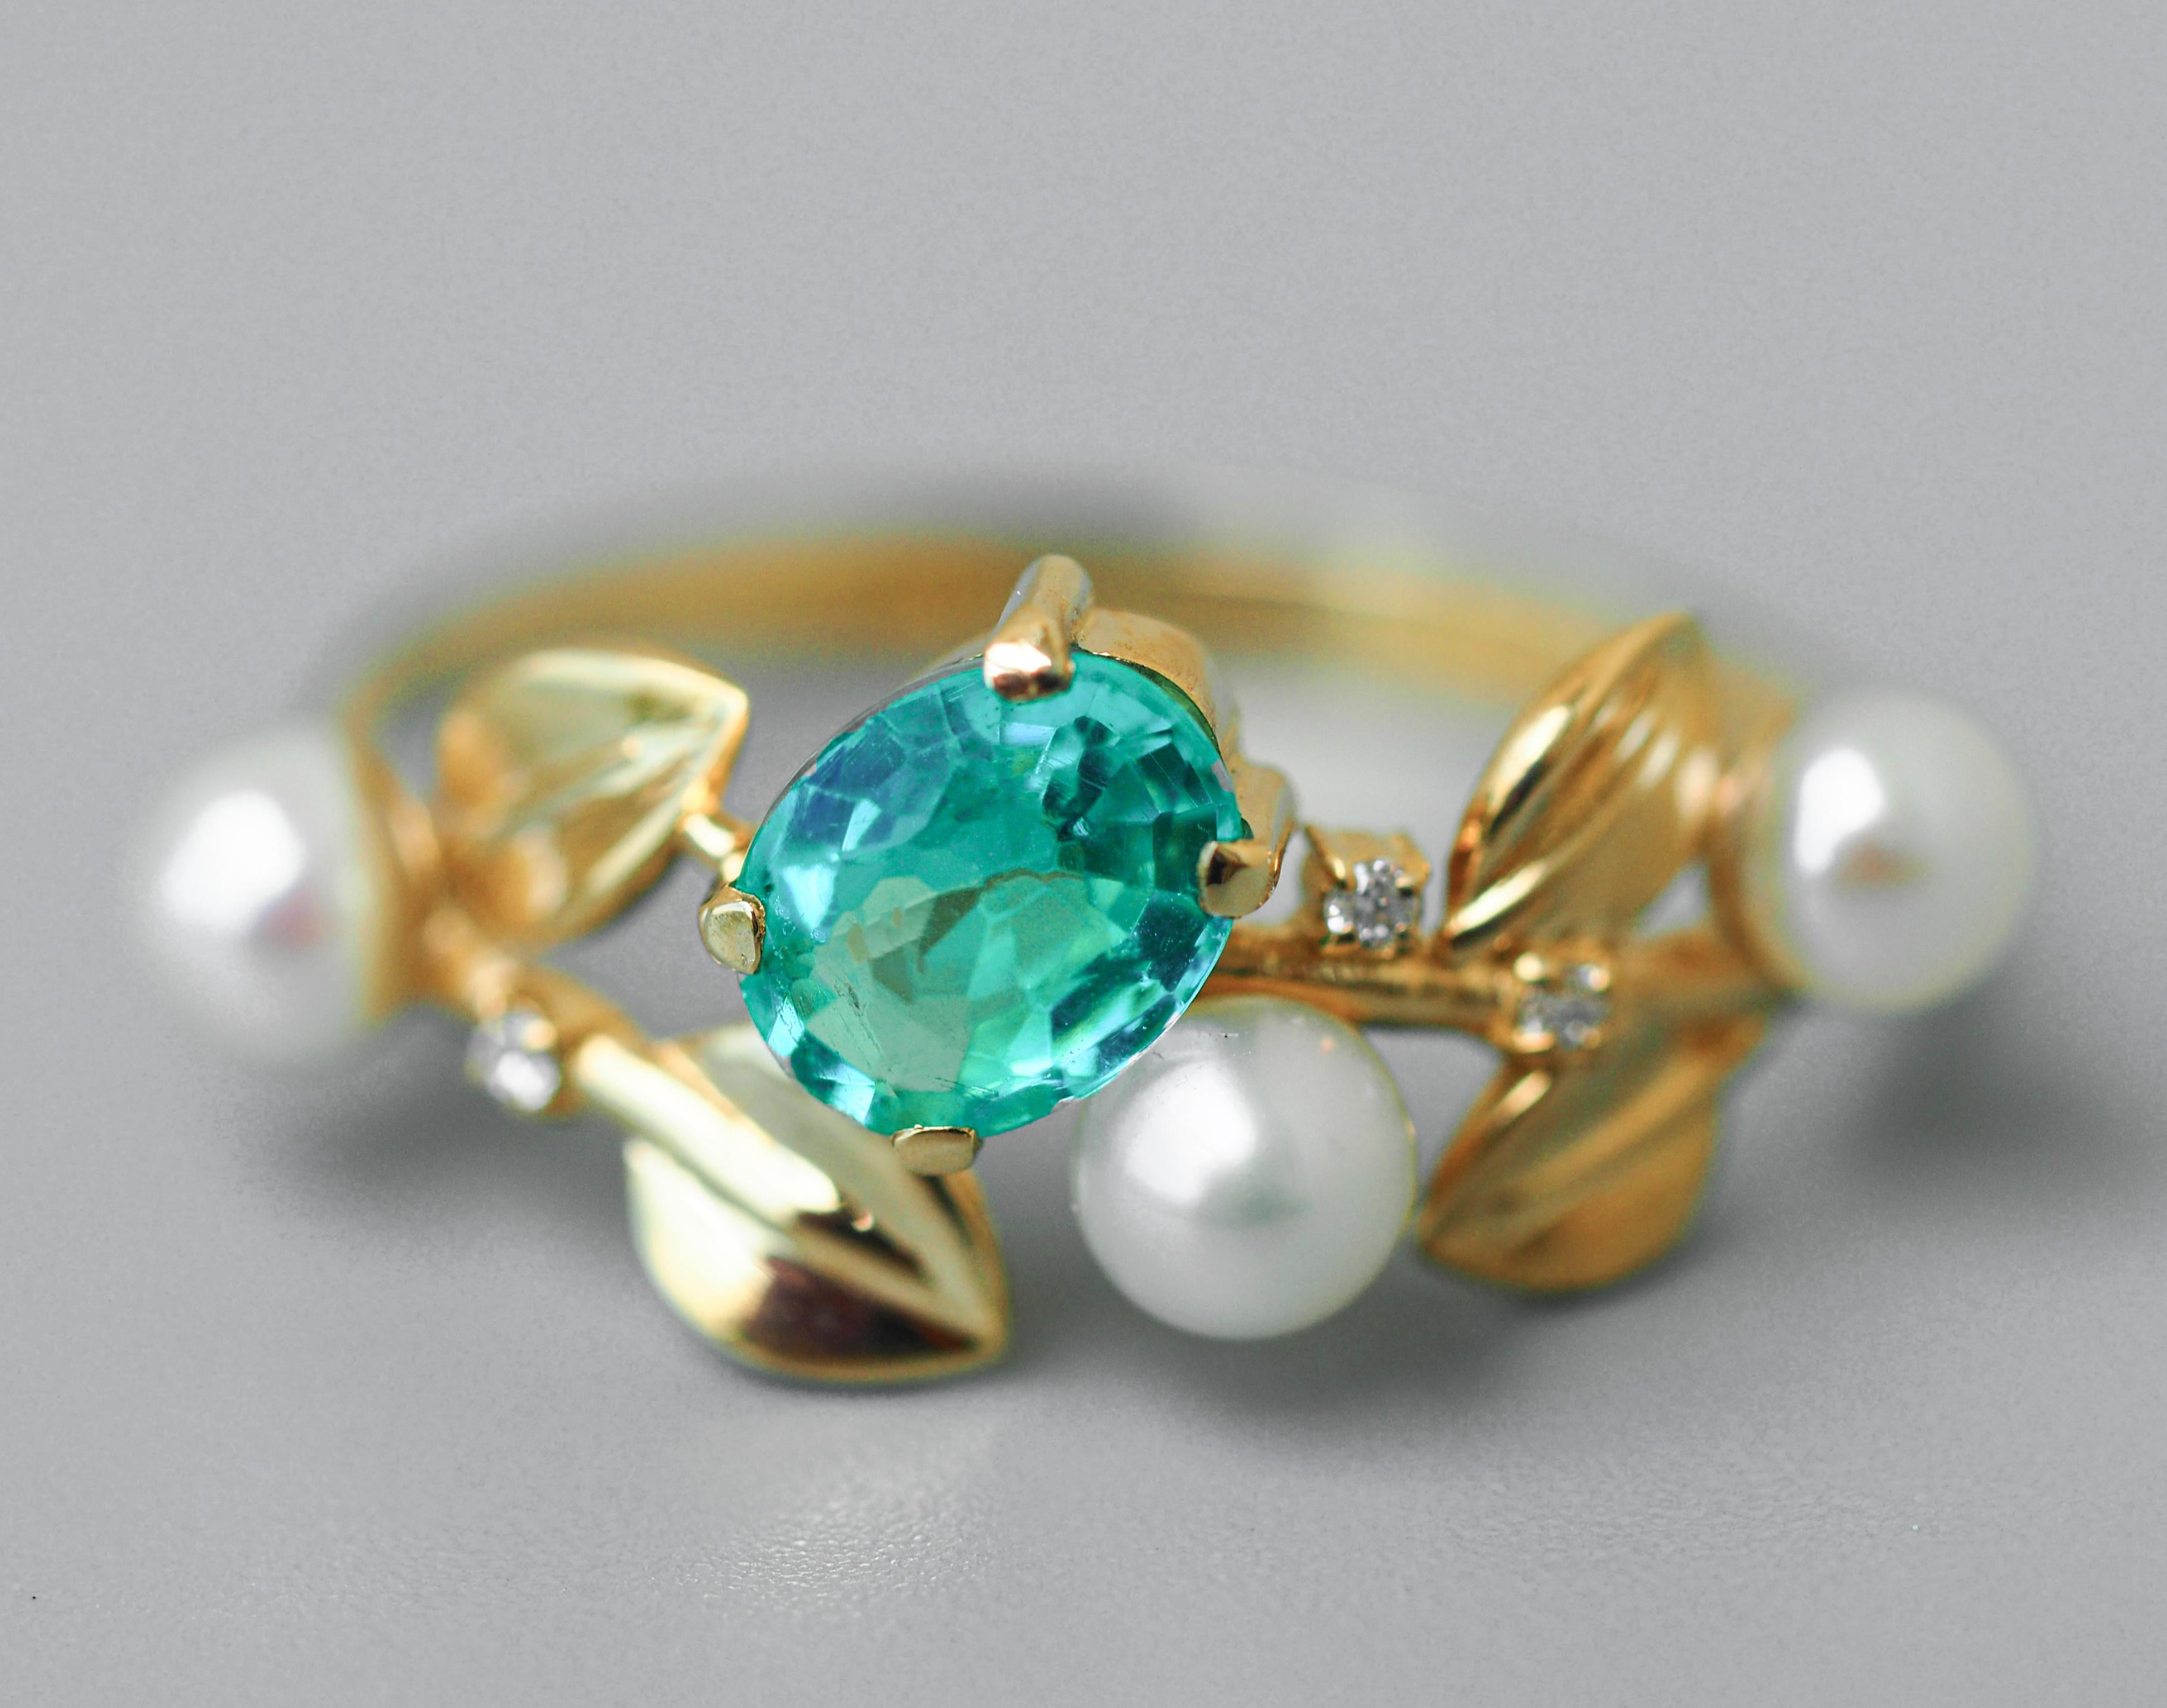 14k Gold Floral Ring with Oval Apatite, Diamonds and Pearls 1